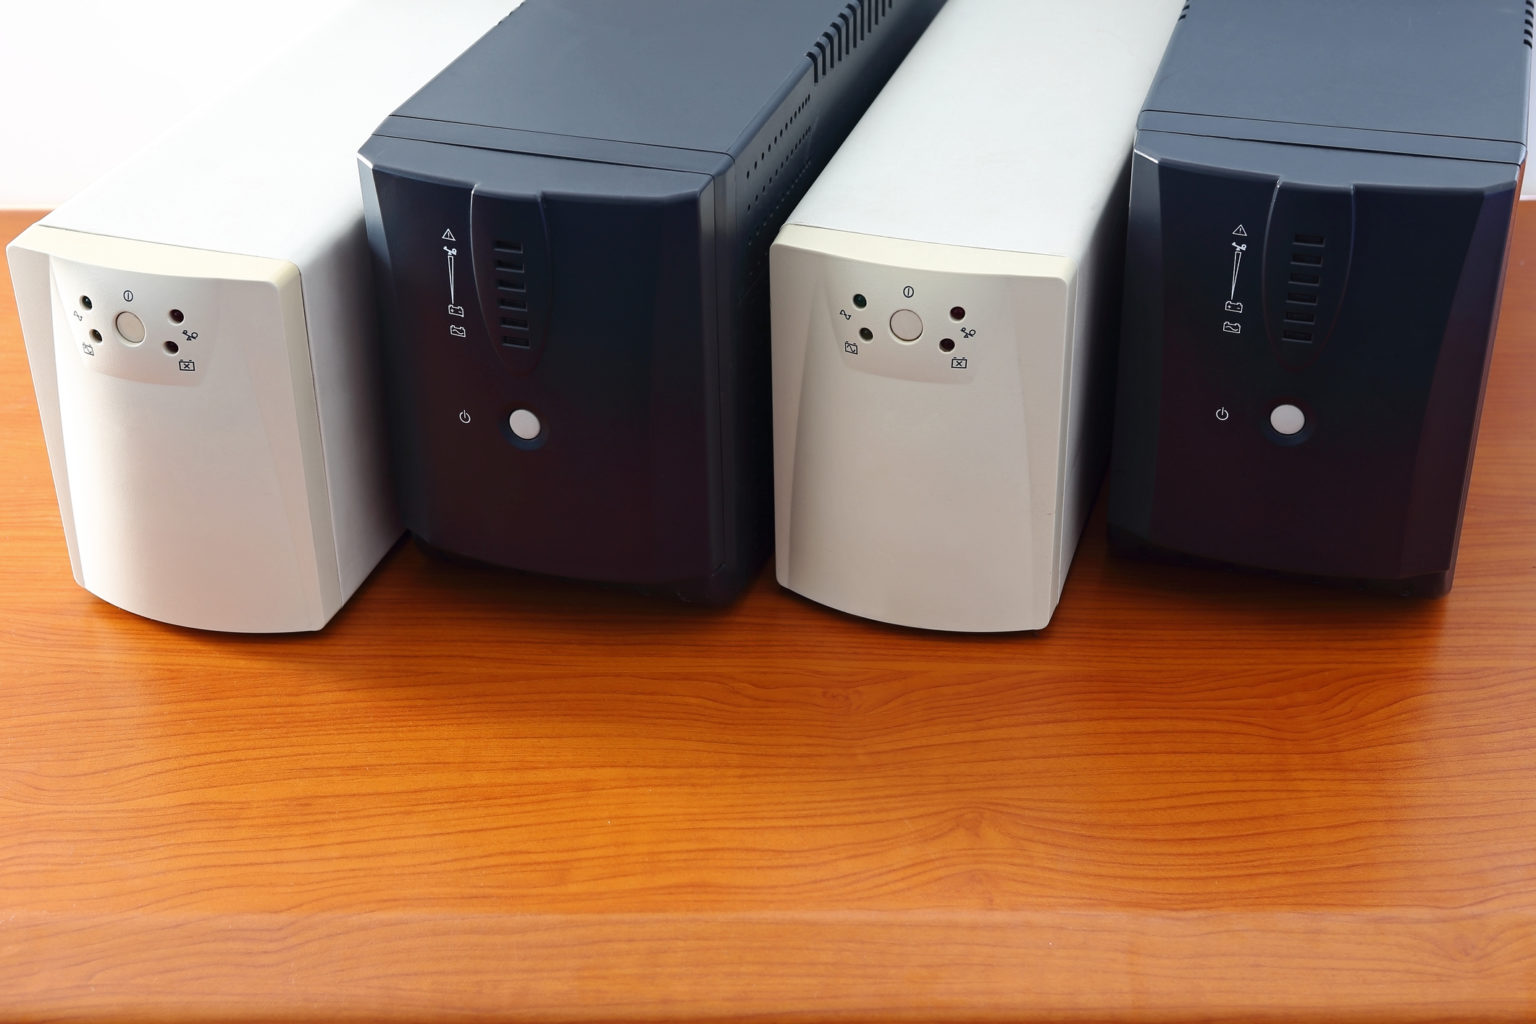 Uninterruptible power supply (UPS) devices in a row.